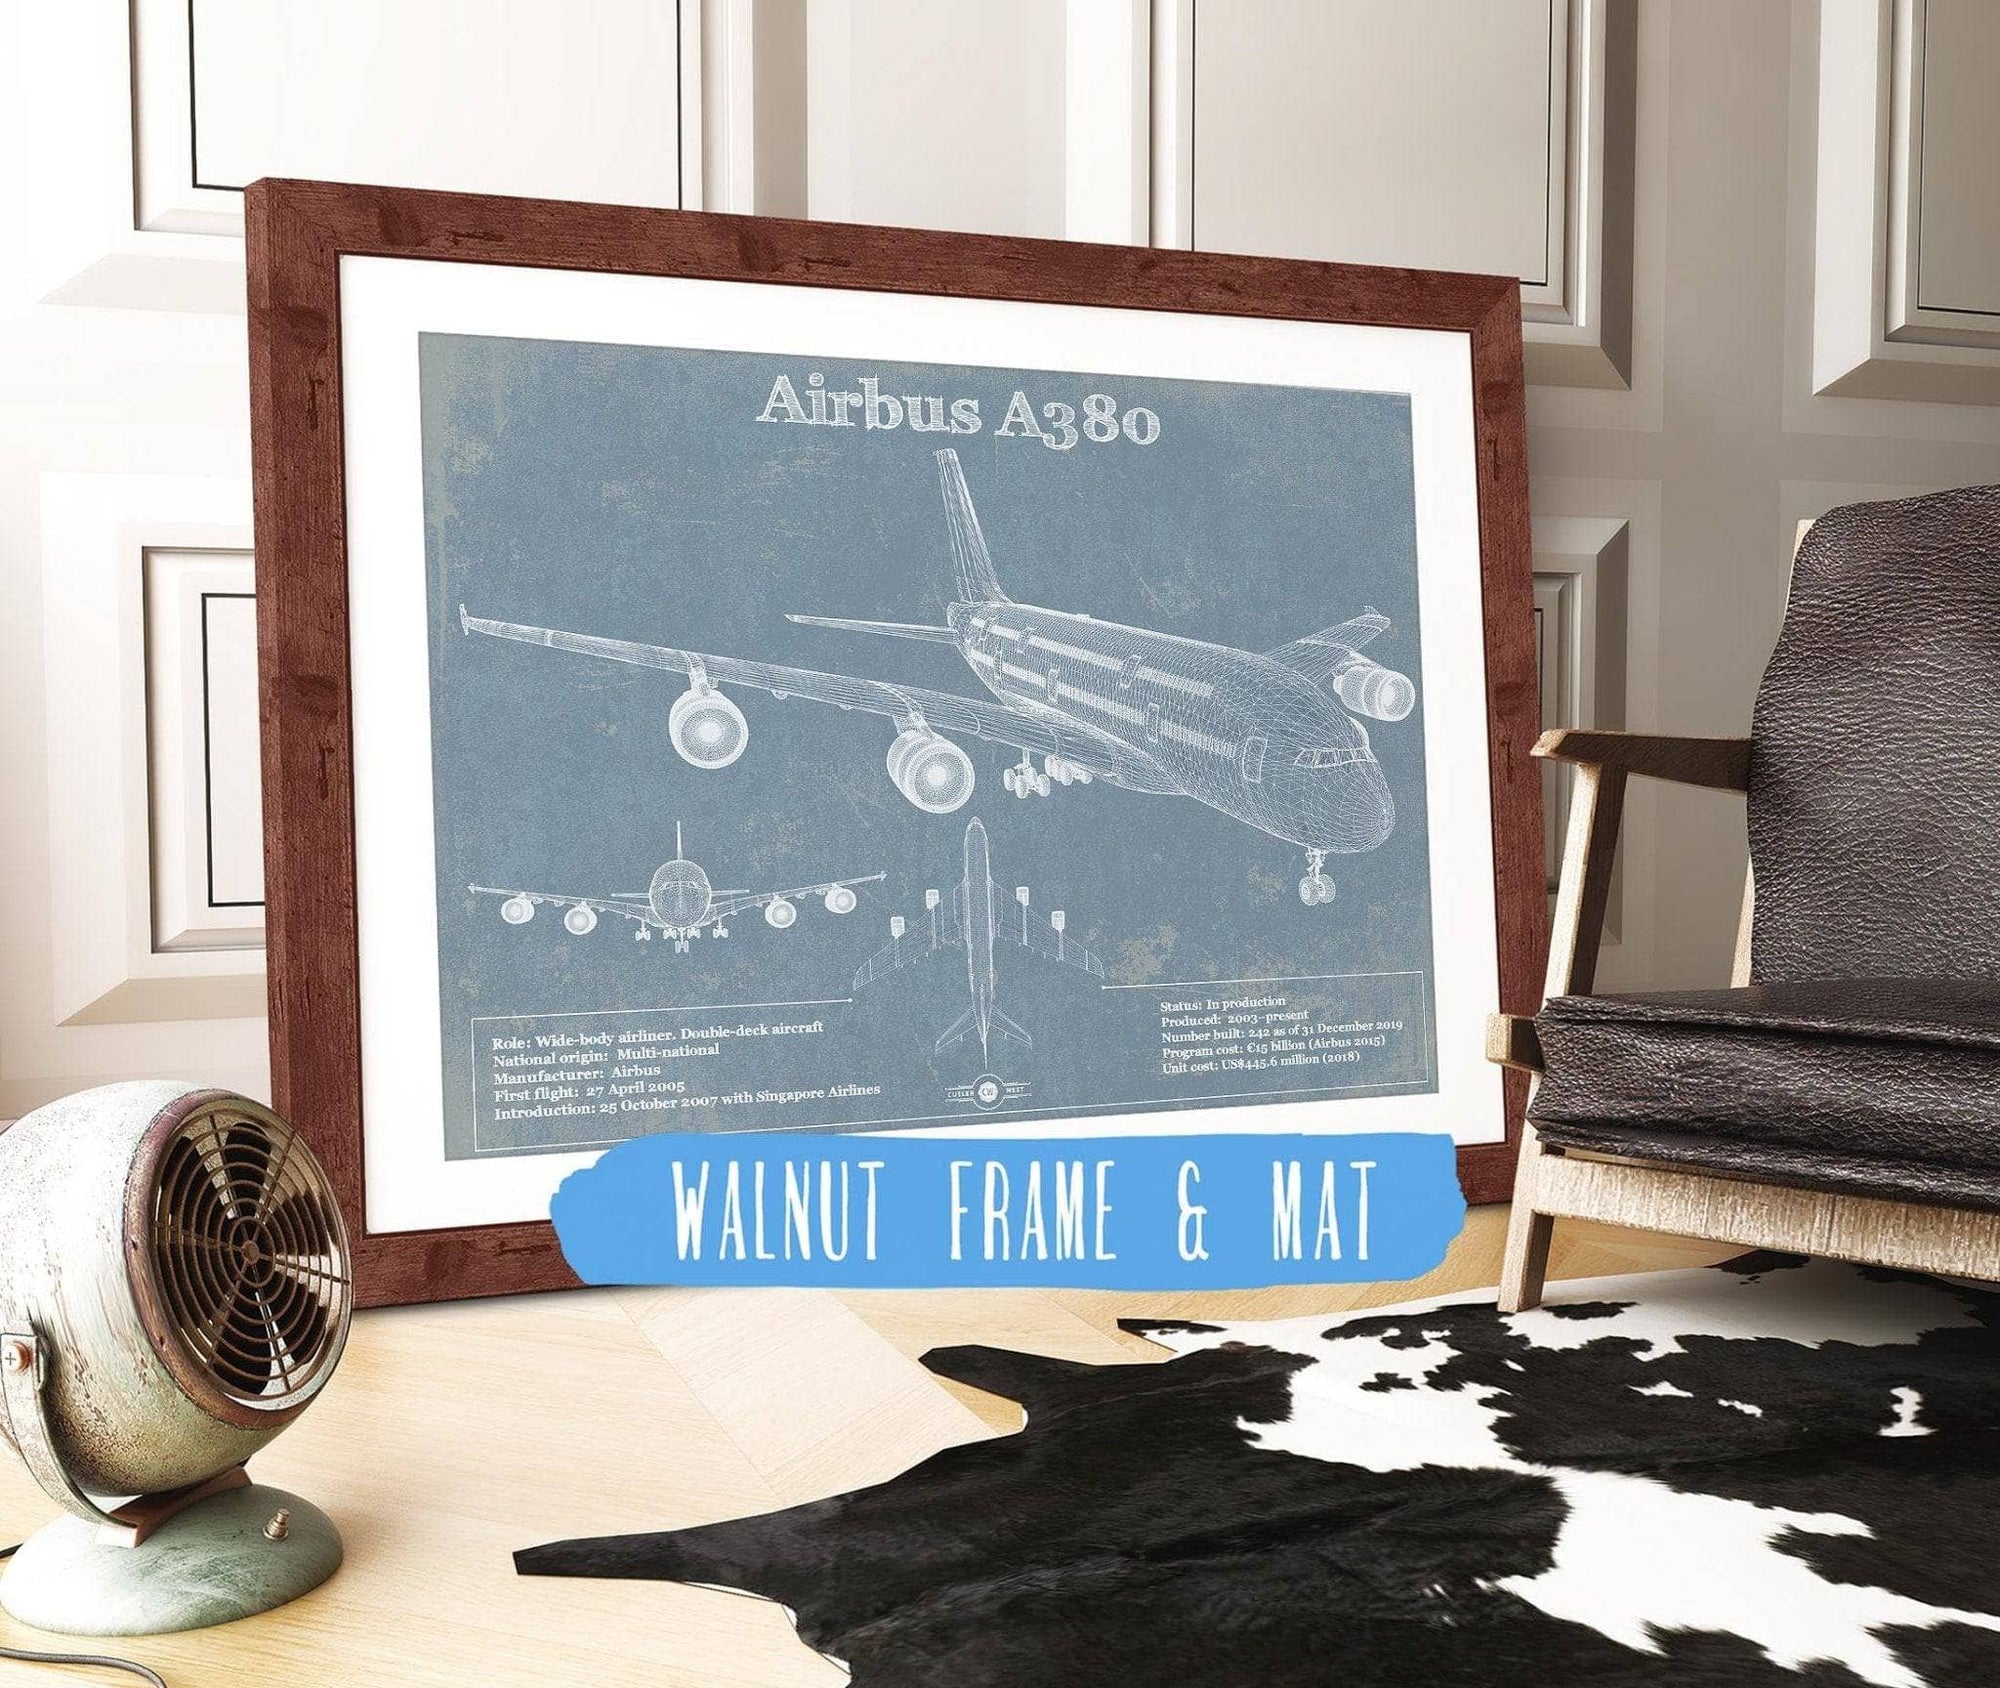 Cutler West Airbus Collection Airbus A380 Vintage Aviation Blueprint Print - Custom Pilot Name can be Added